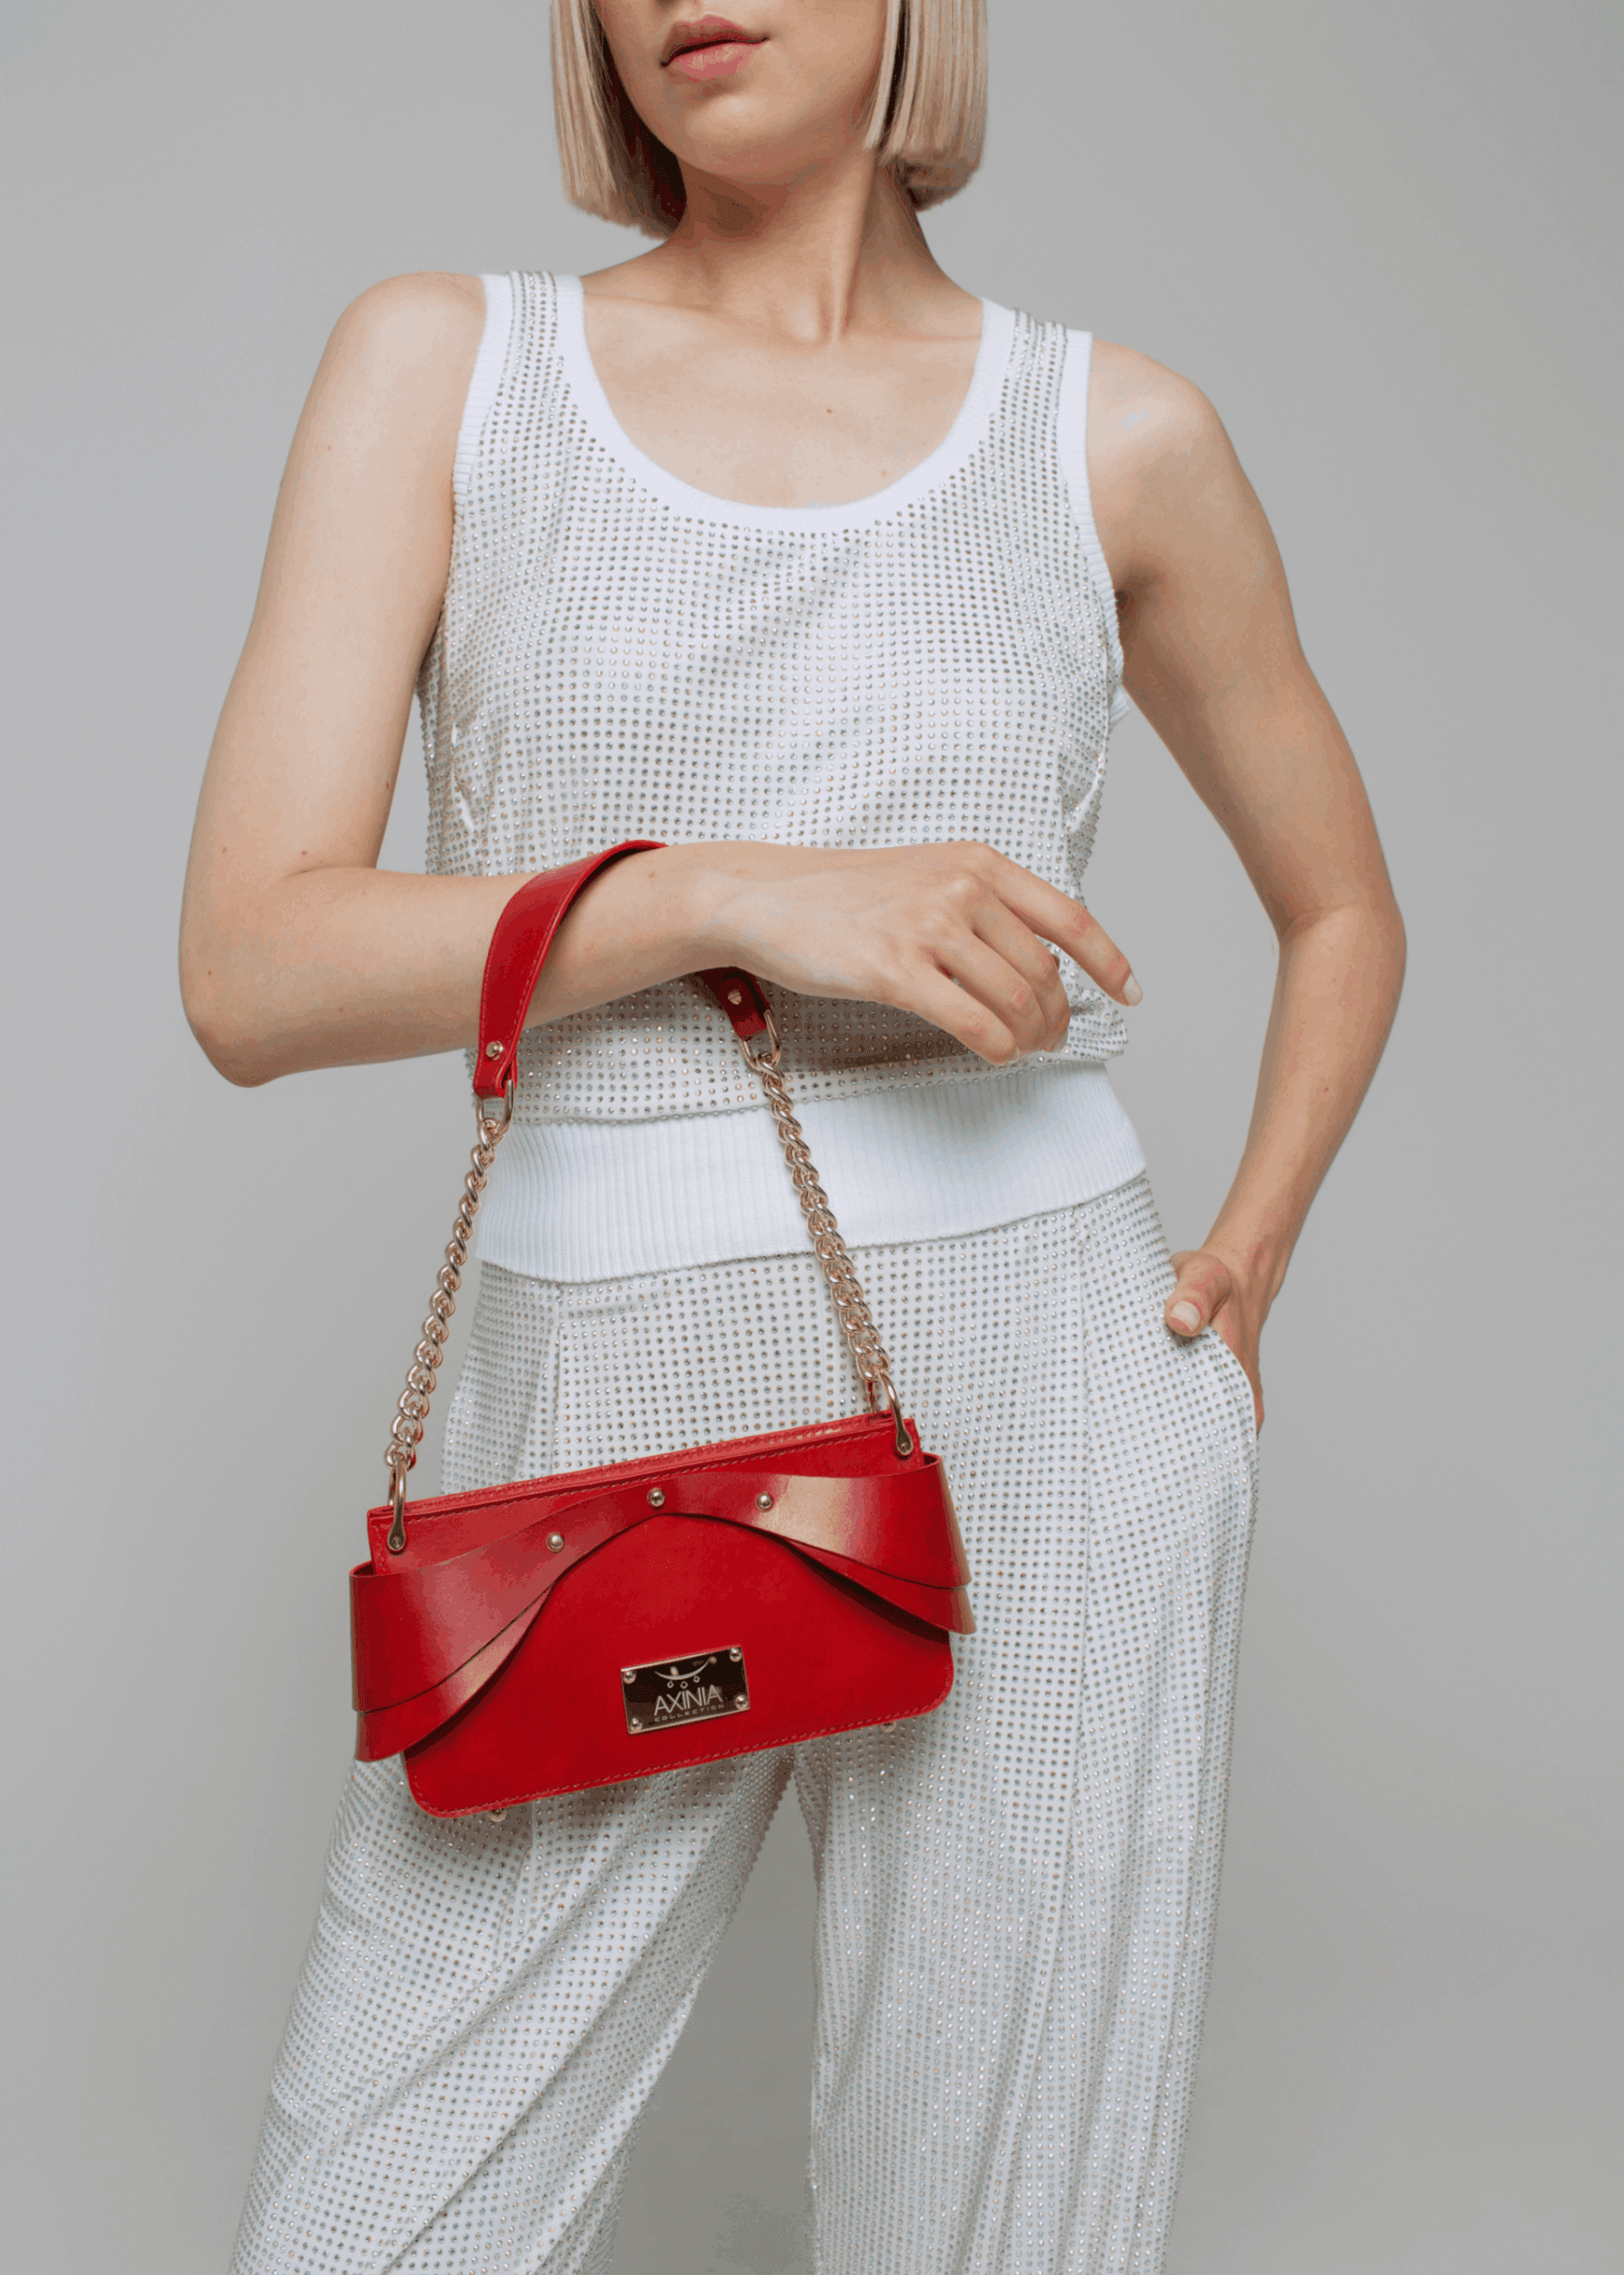 Exquisite detail of Axinia Corsette Bag showcasing the fine craftsmanship and elegant design characteristic of Axinia Collection 's luxury collection.